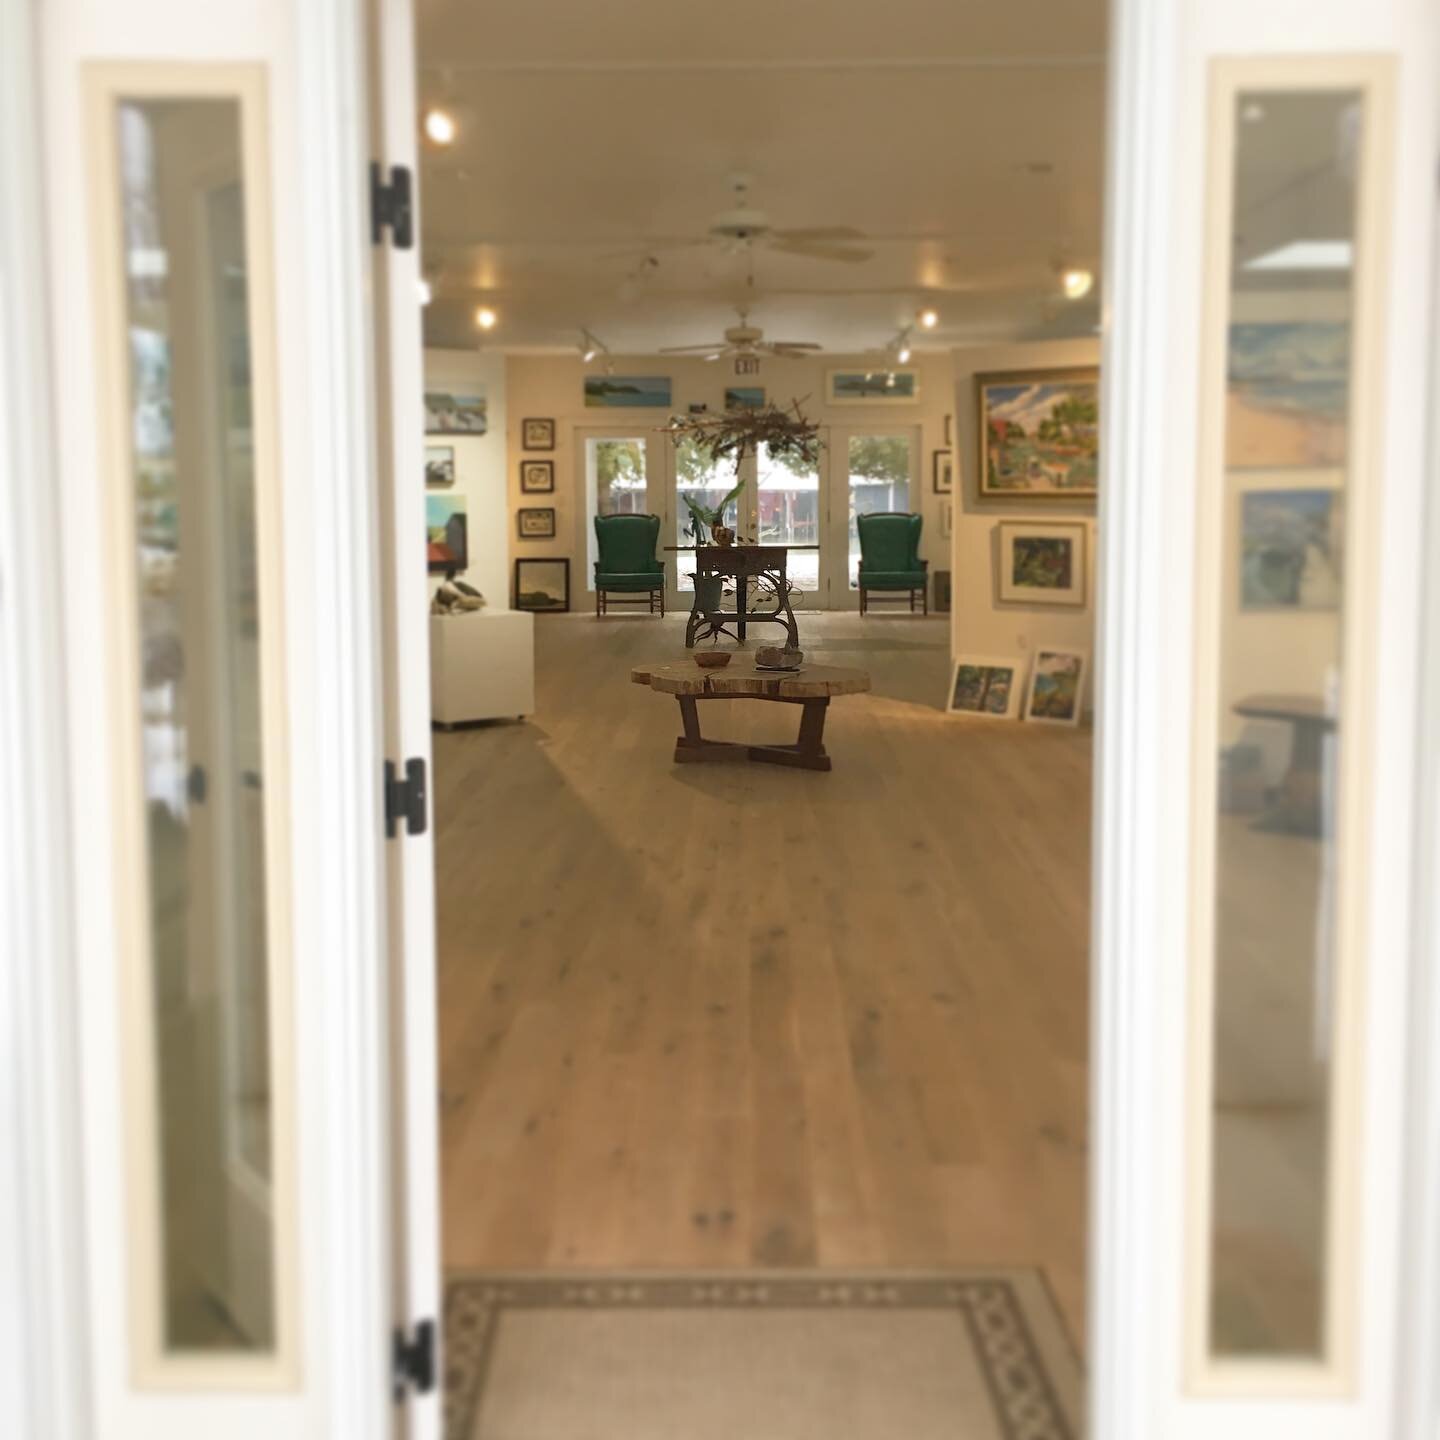 The sky may be gray, but it&rsquo;s light and bright inside the gallery! After a brief break, our door is open again Wednesday through Saturday 11-4, and always by appointment. Come say hi and get a jump on your holiday shopping! #mainstreetgallery #